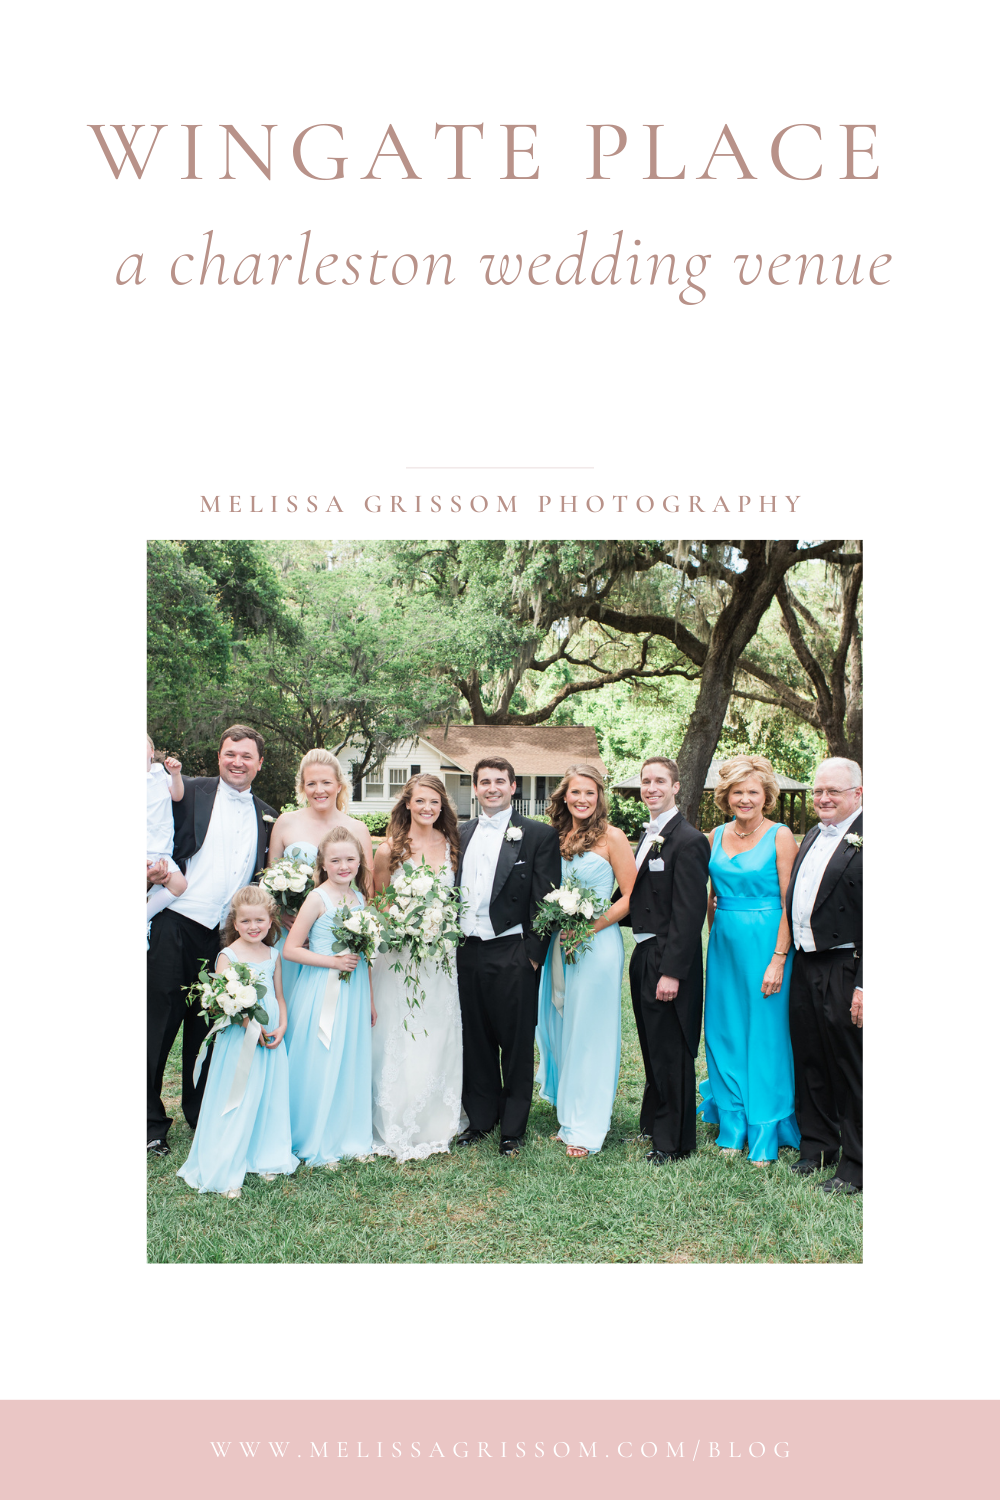 owners of wingate place a Charleston wedding venue